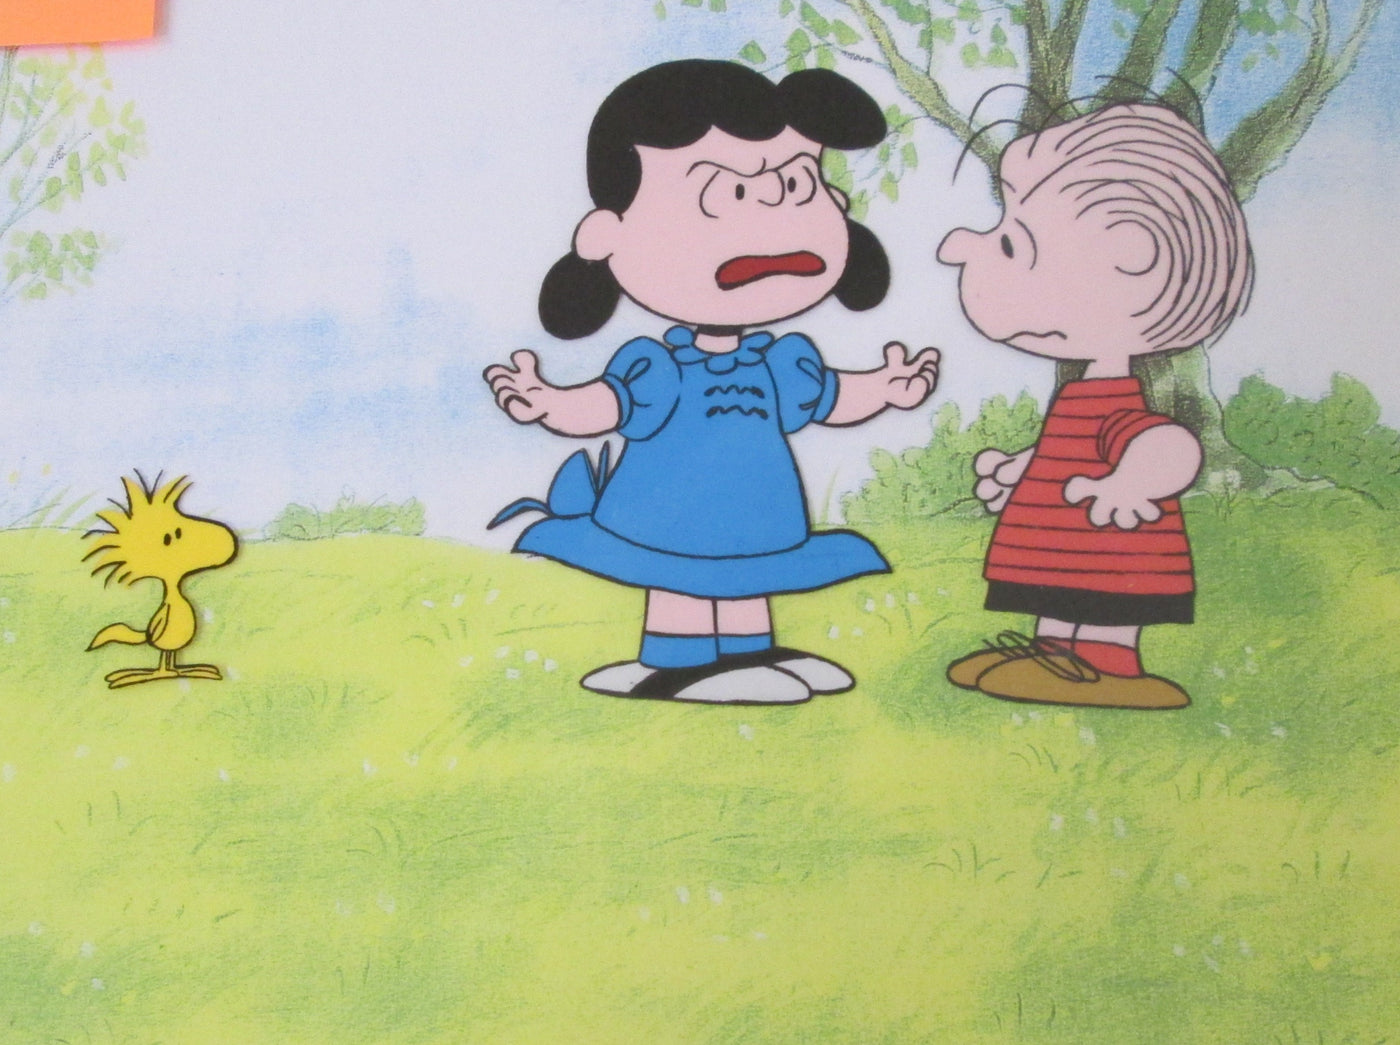 Original Peanuts Production Cel featuring Woodstock, Lucy, and Linus